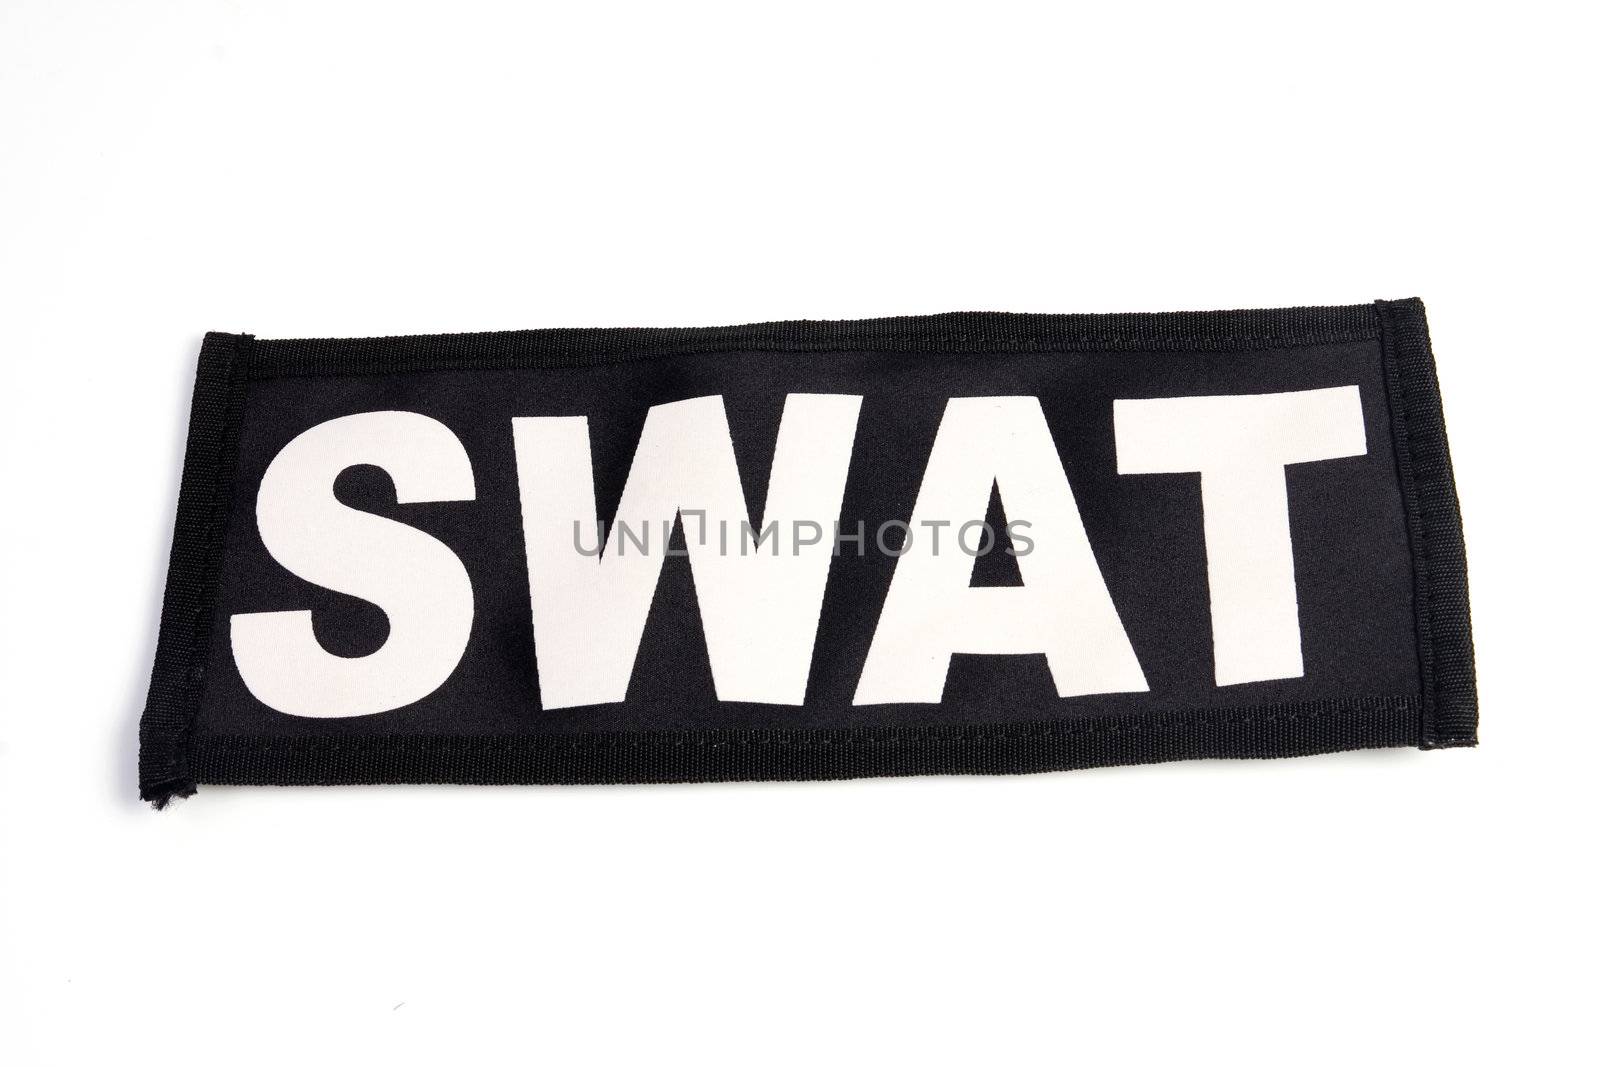 "SWAT" patch on the white background